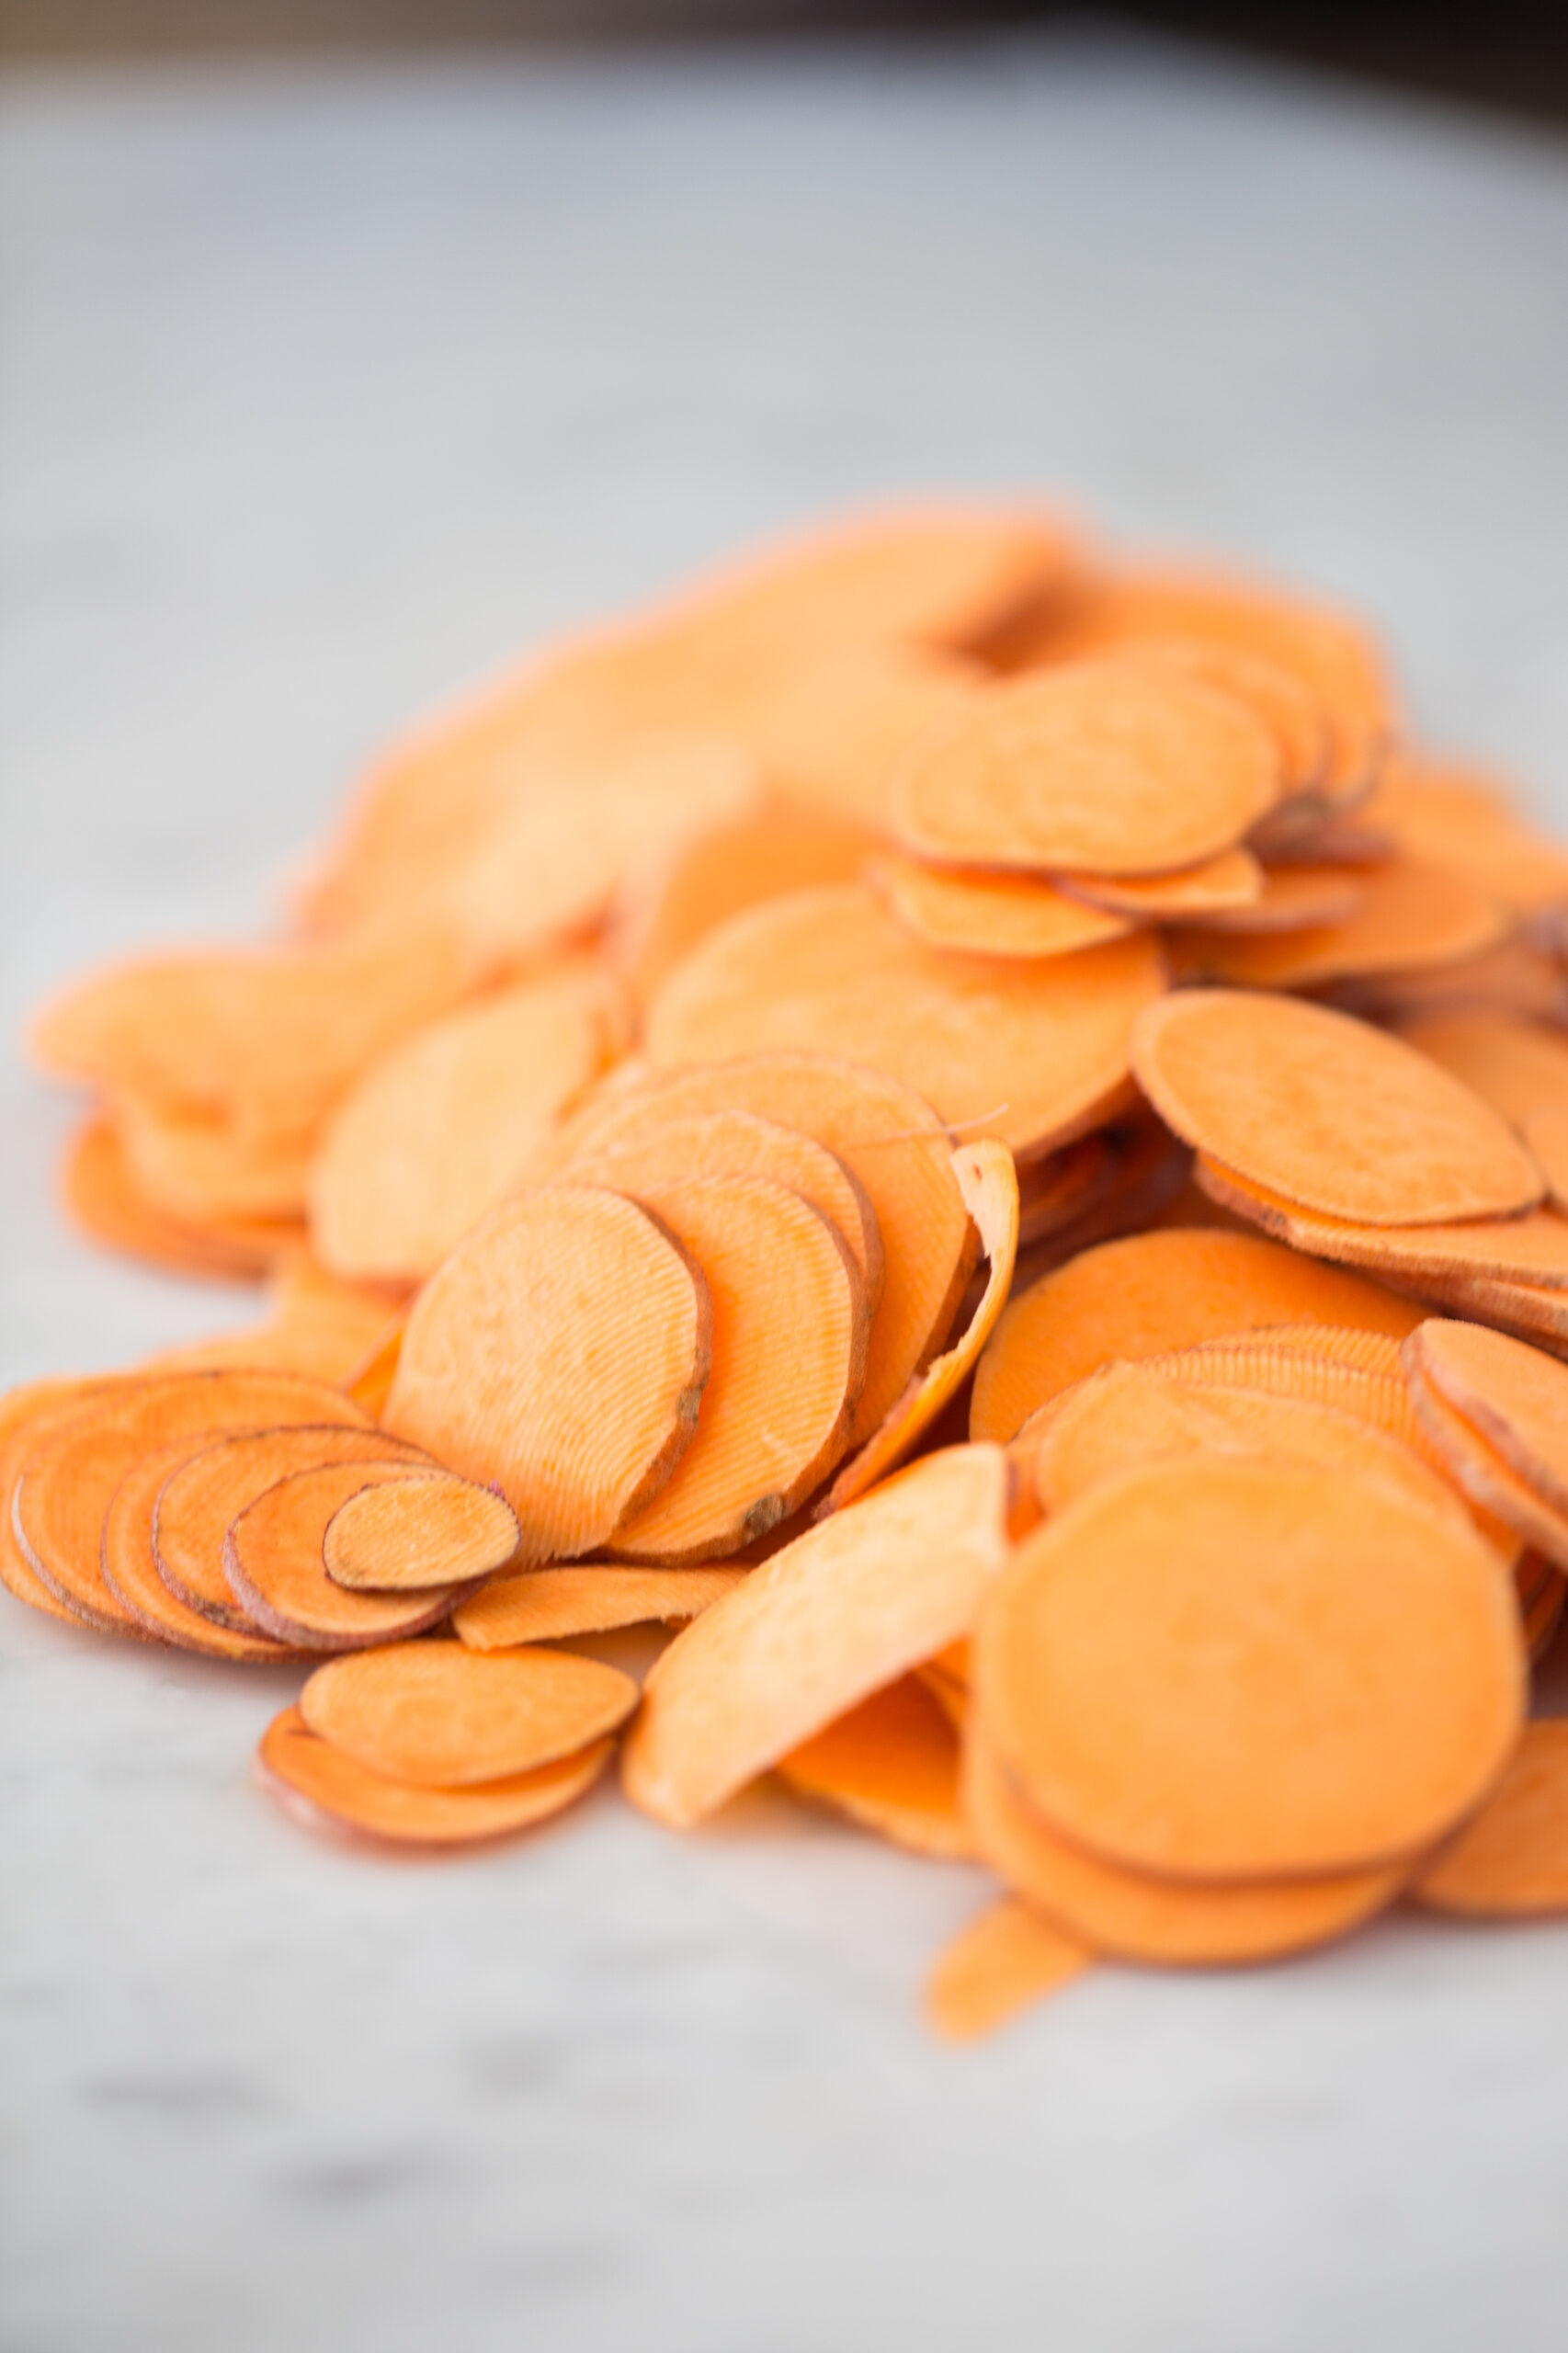 Thinly sliced sweet potatoes on hte white counter top.